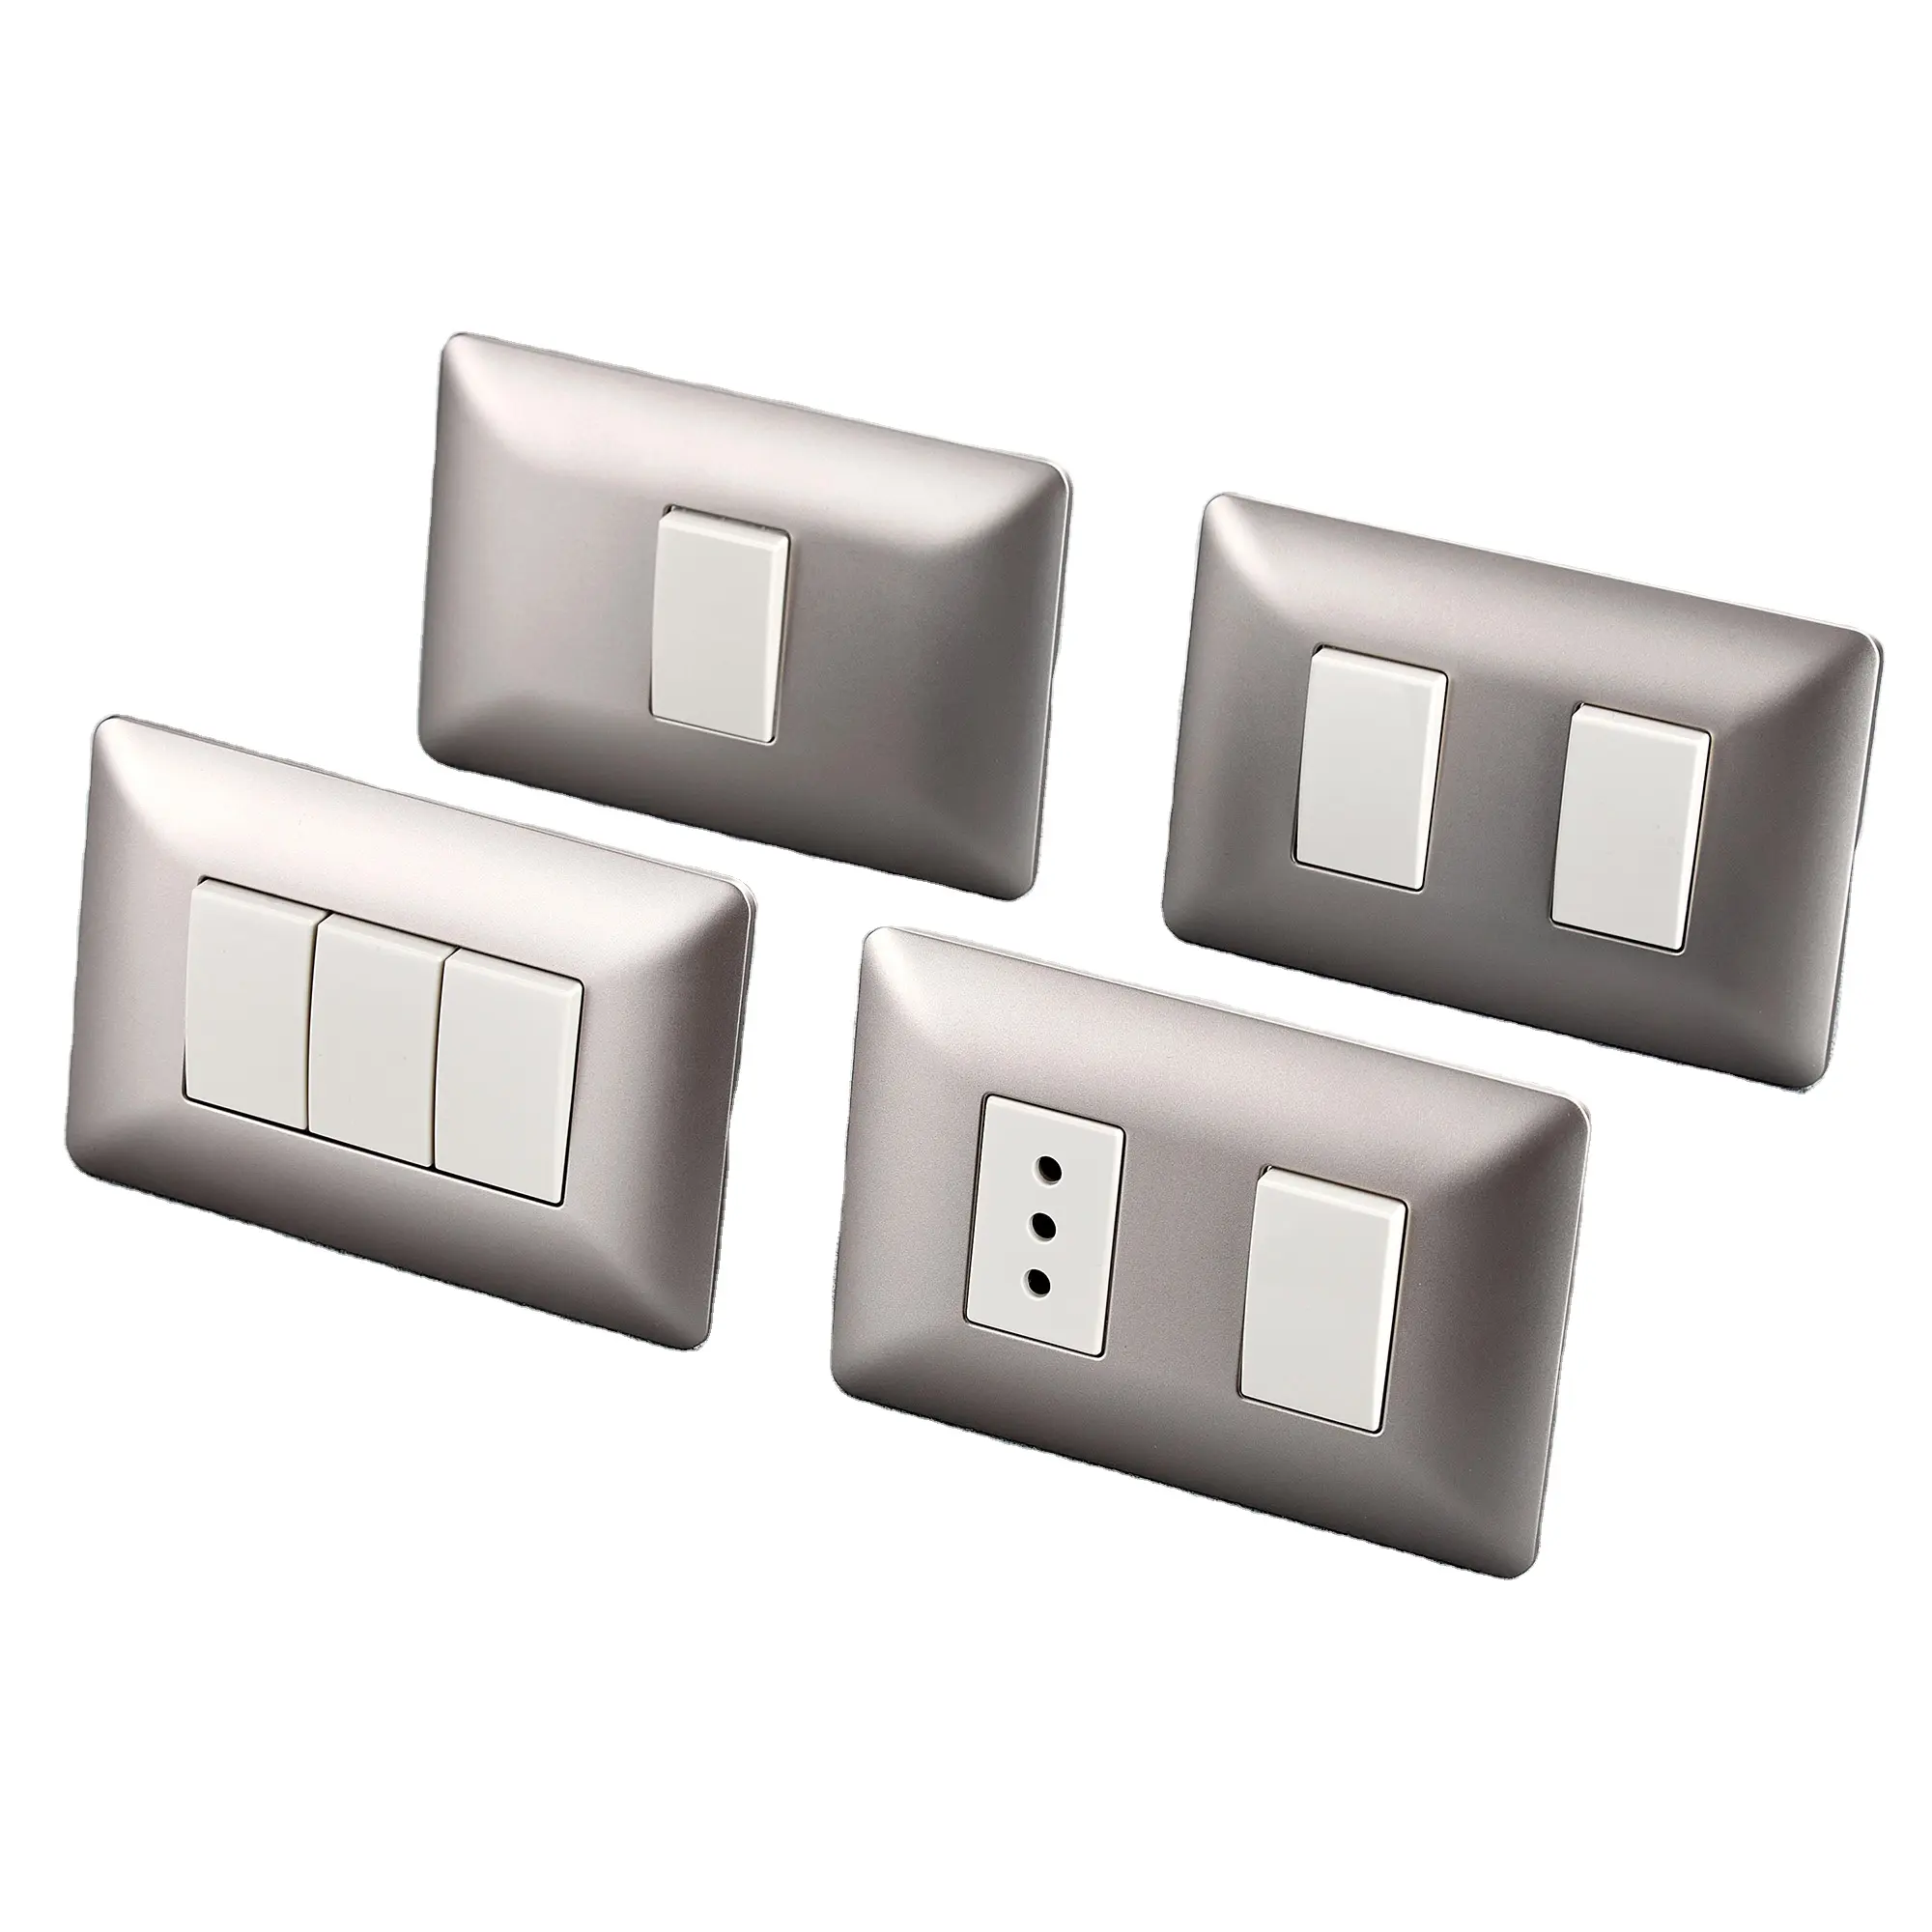 AM series MCS Free Sample Widely Used 118 Type Superior Quality Electrical Wall Home Light Switches and Sockets